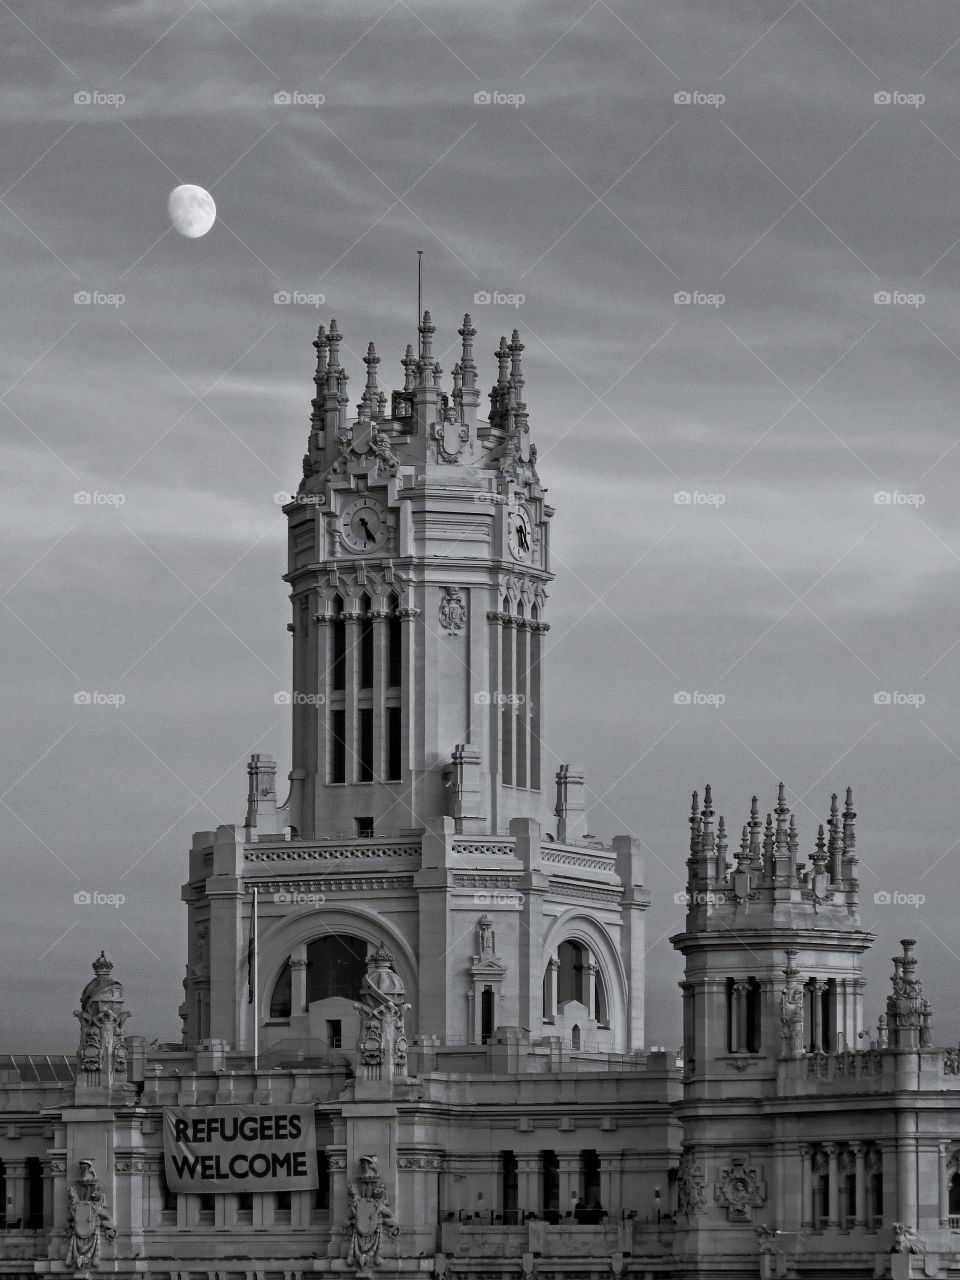 Moon and architecture